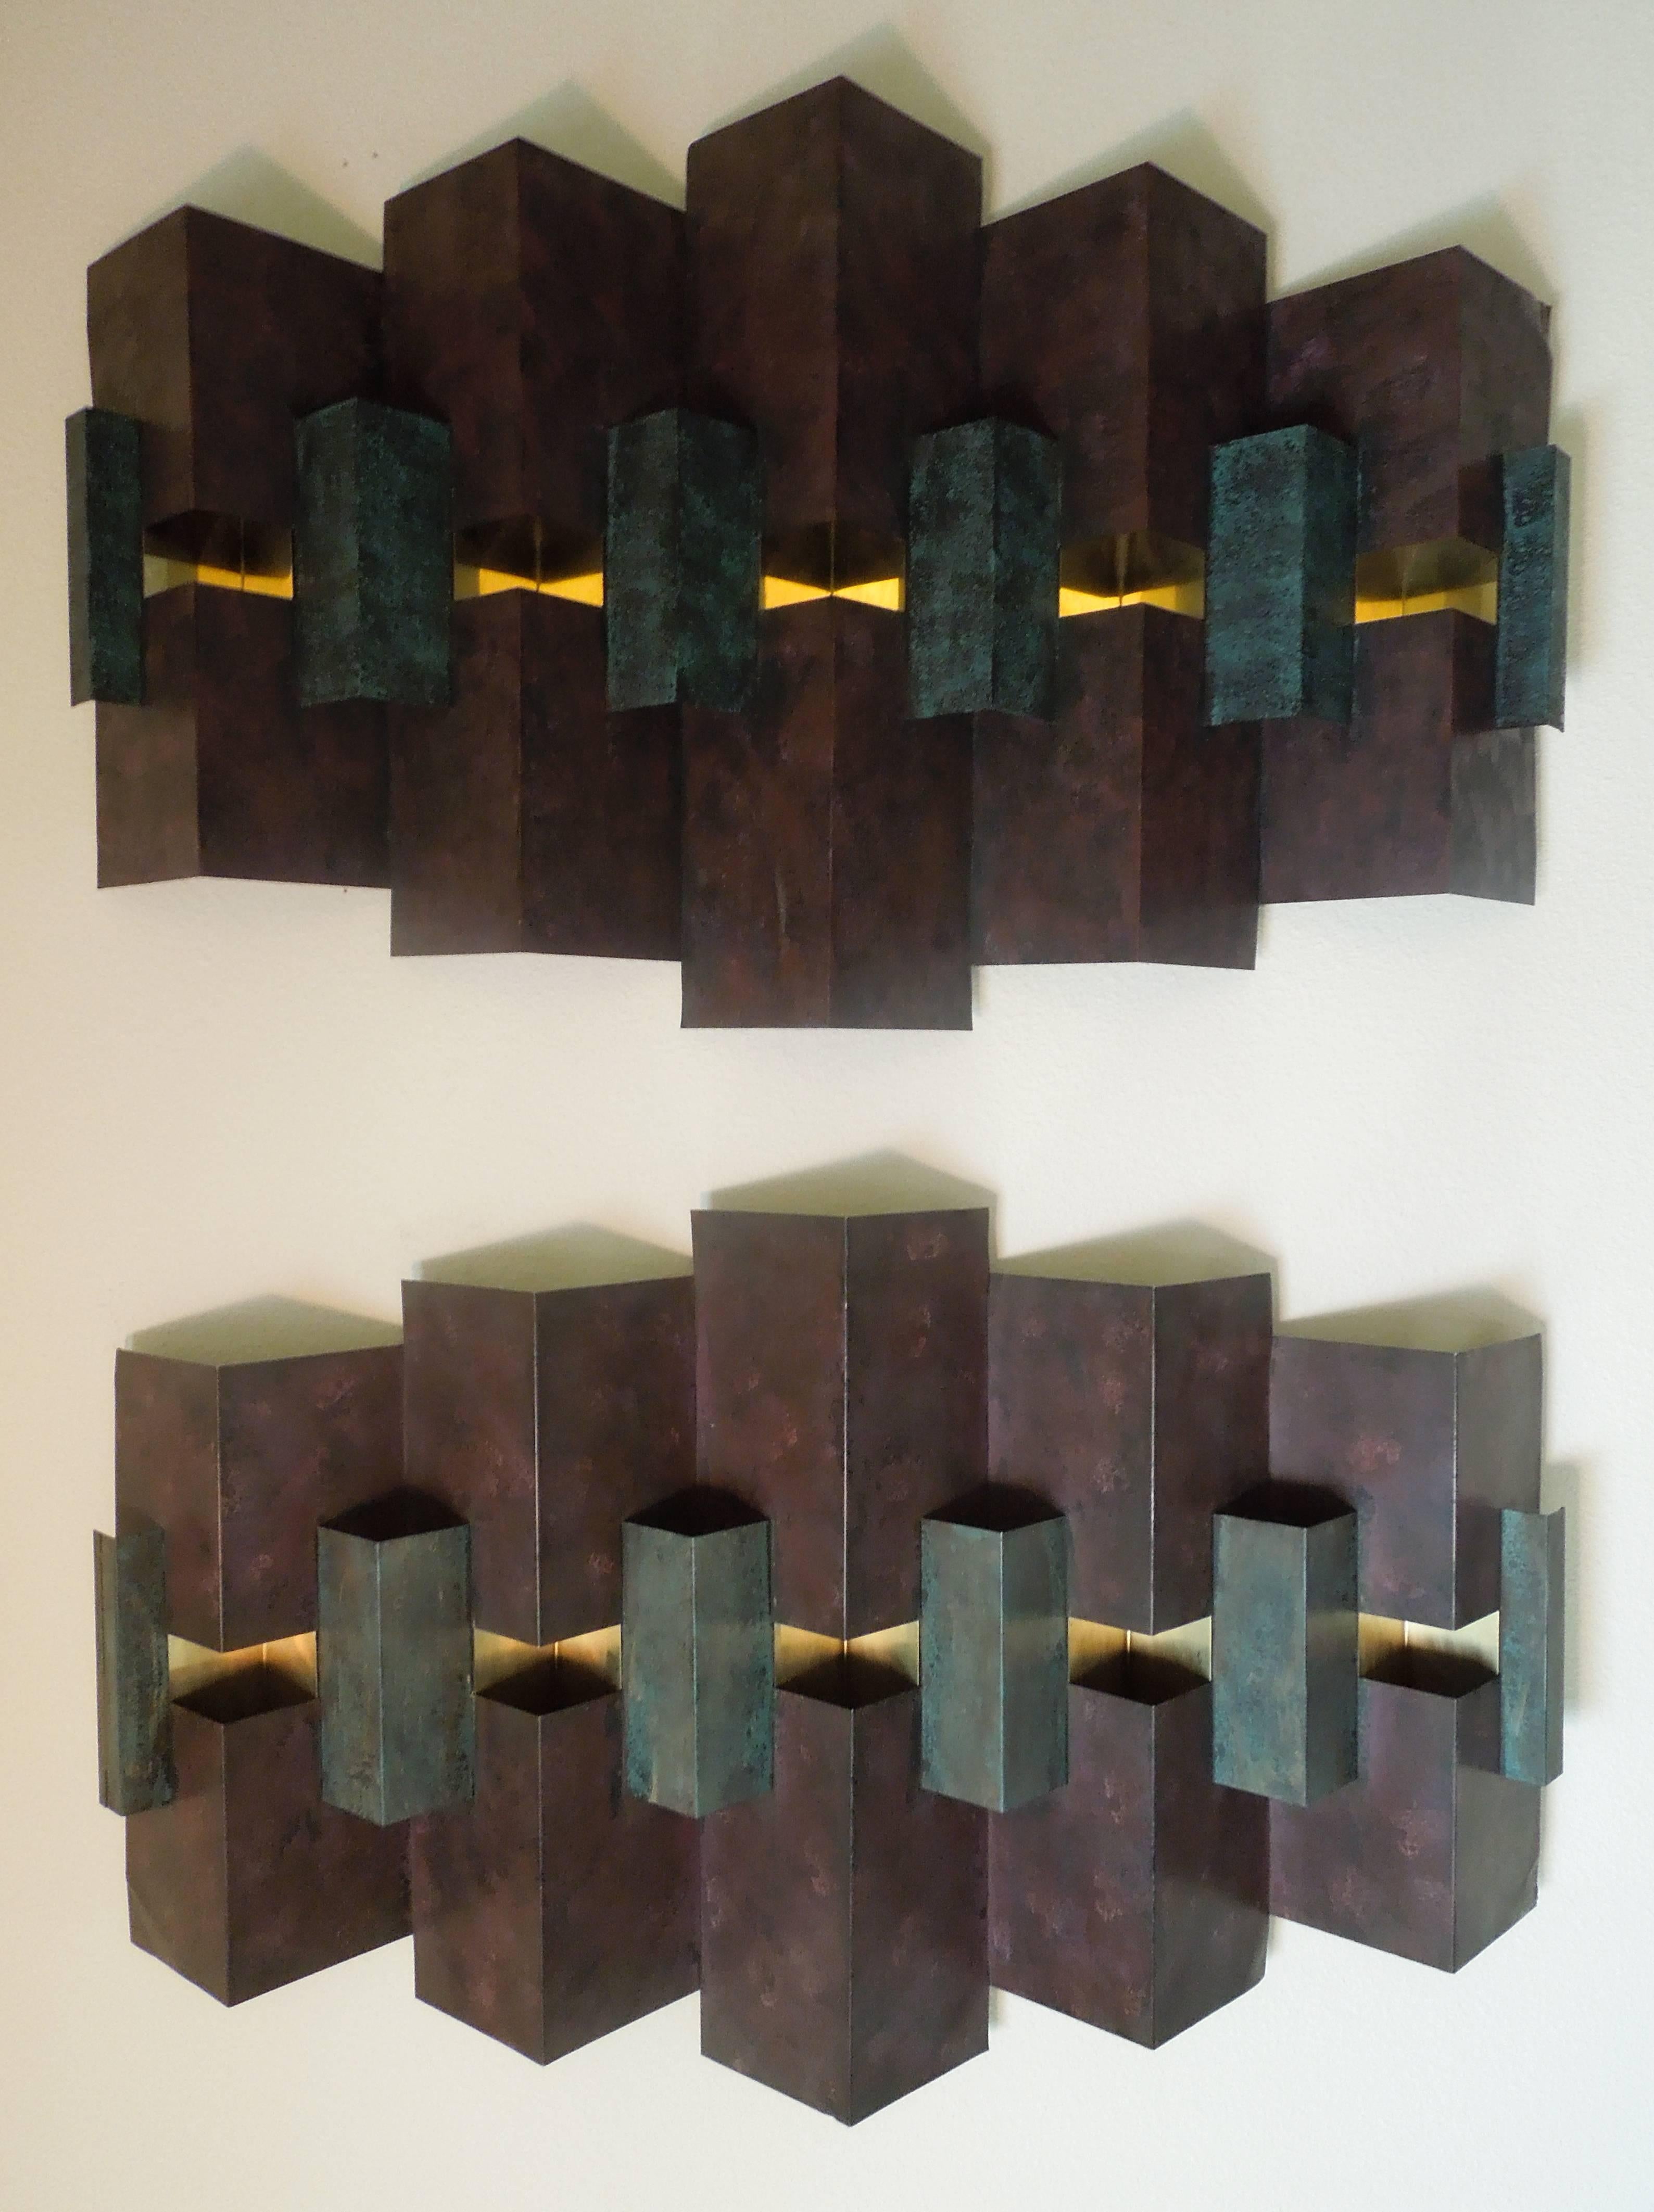 From a very upscale and interesting Palm Springs setae are a pair of 1993 signed, Jere wall sculptures. They were hung vertically but are meant to be hung horizontally as well if desired. Each one hand painted, they are slightly different colors